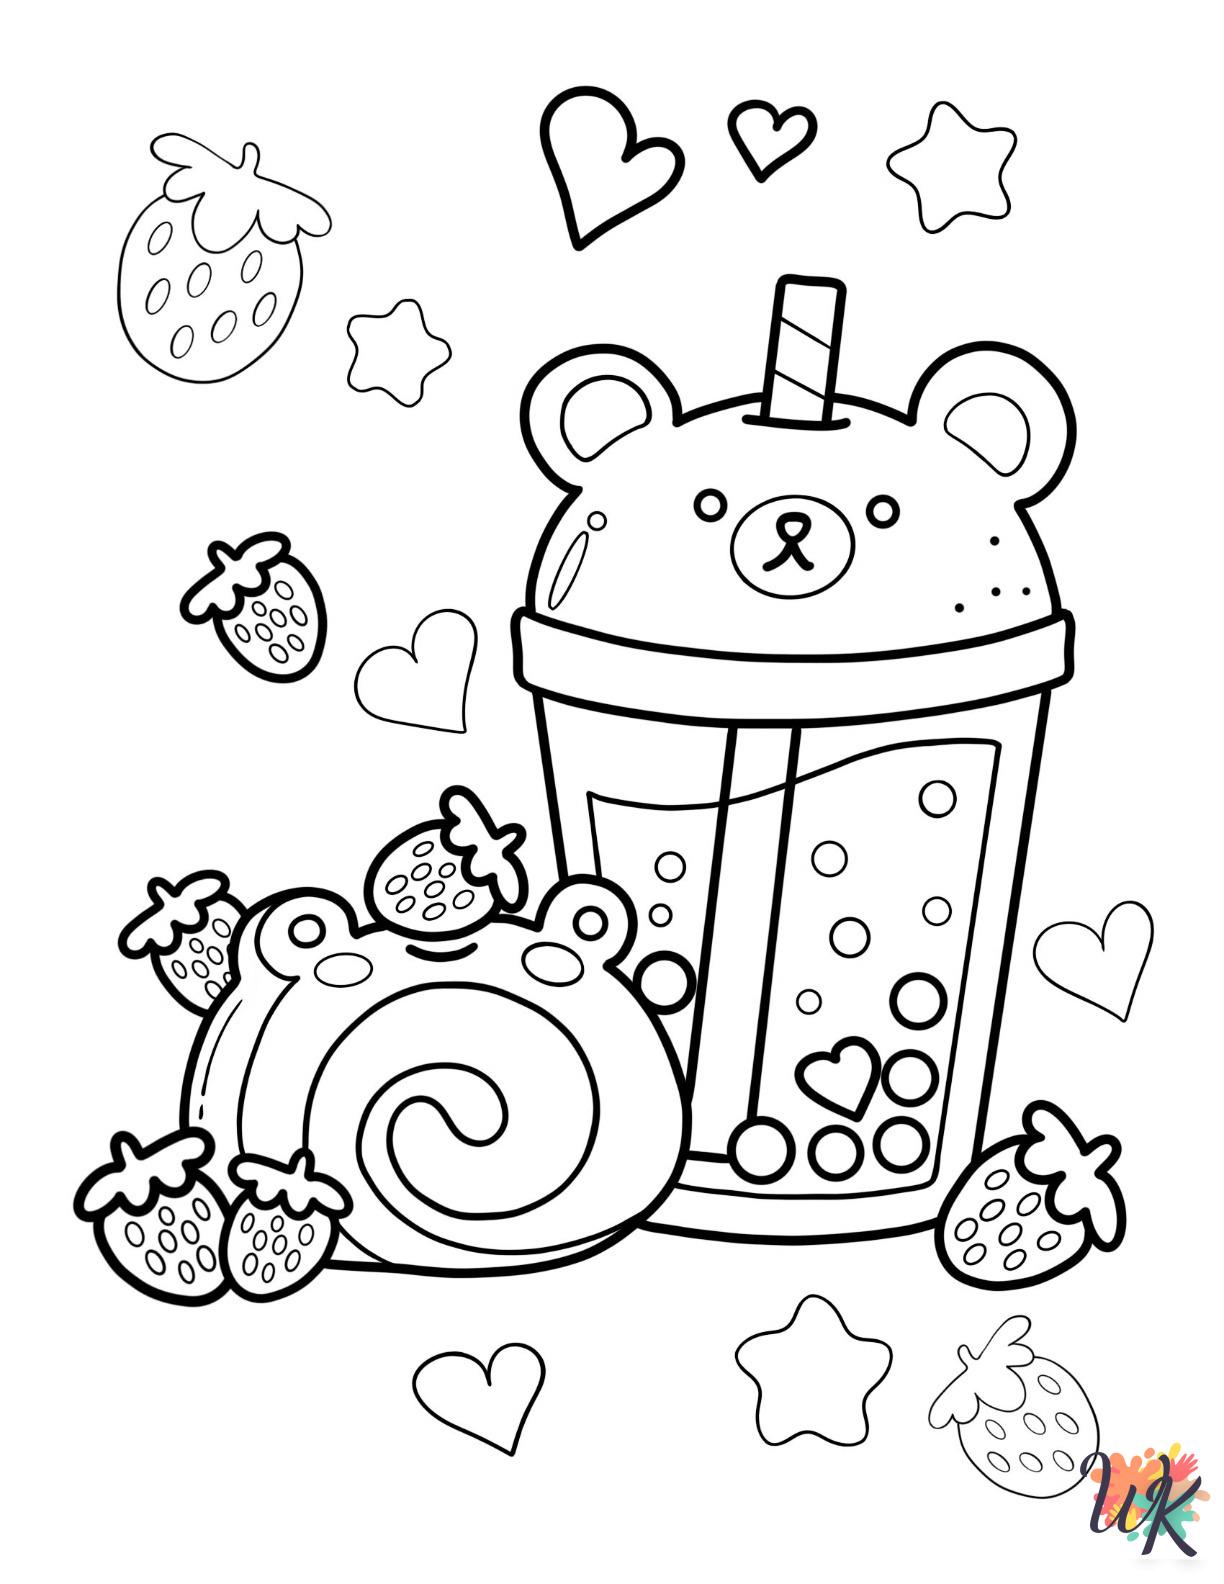 printable Boba Tea coloring pages for adults